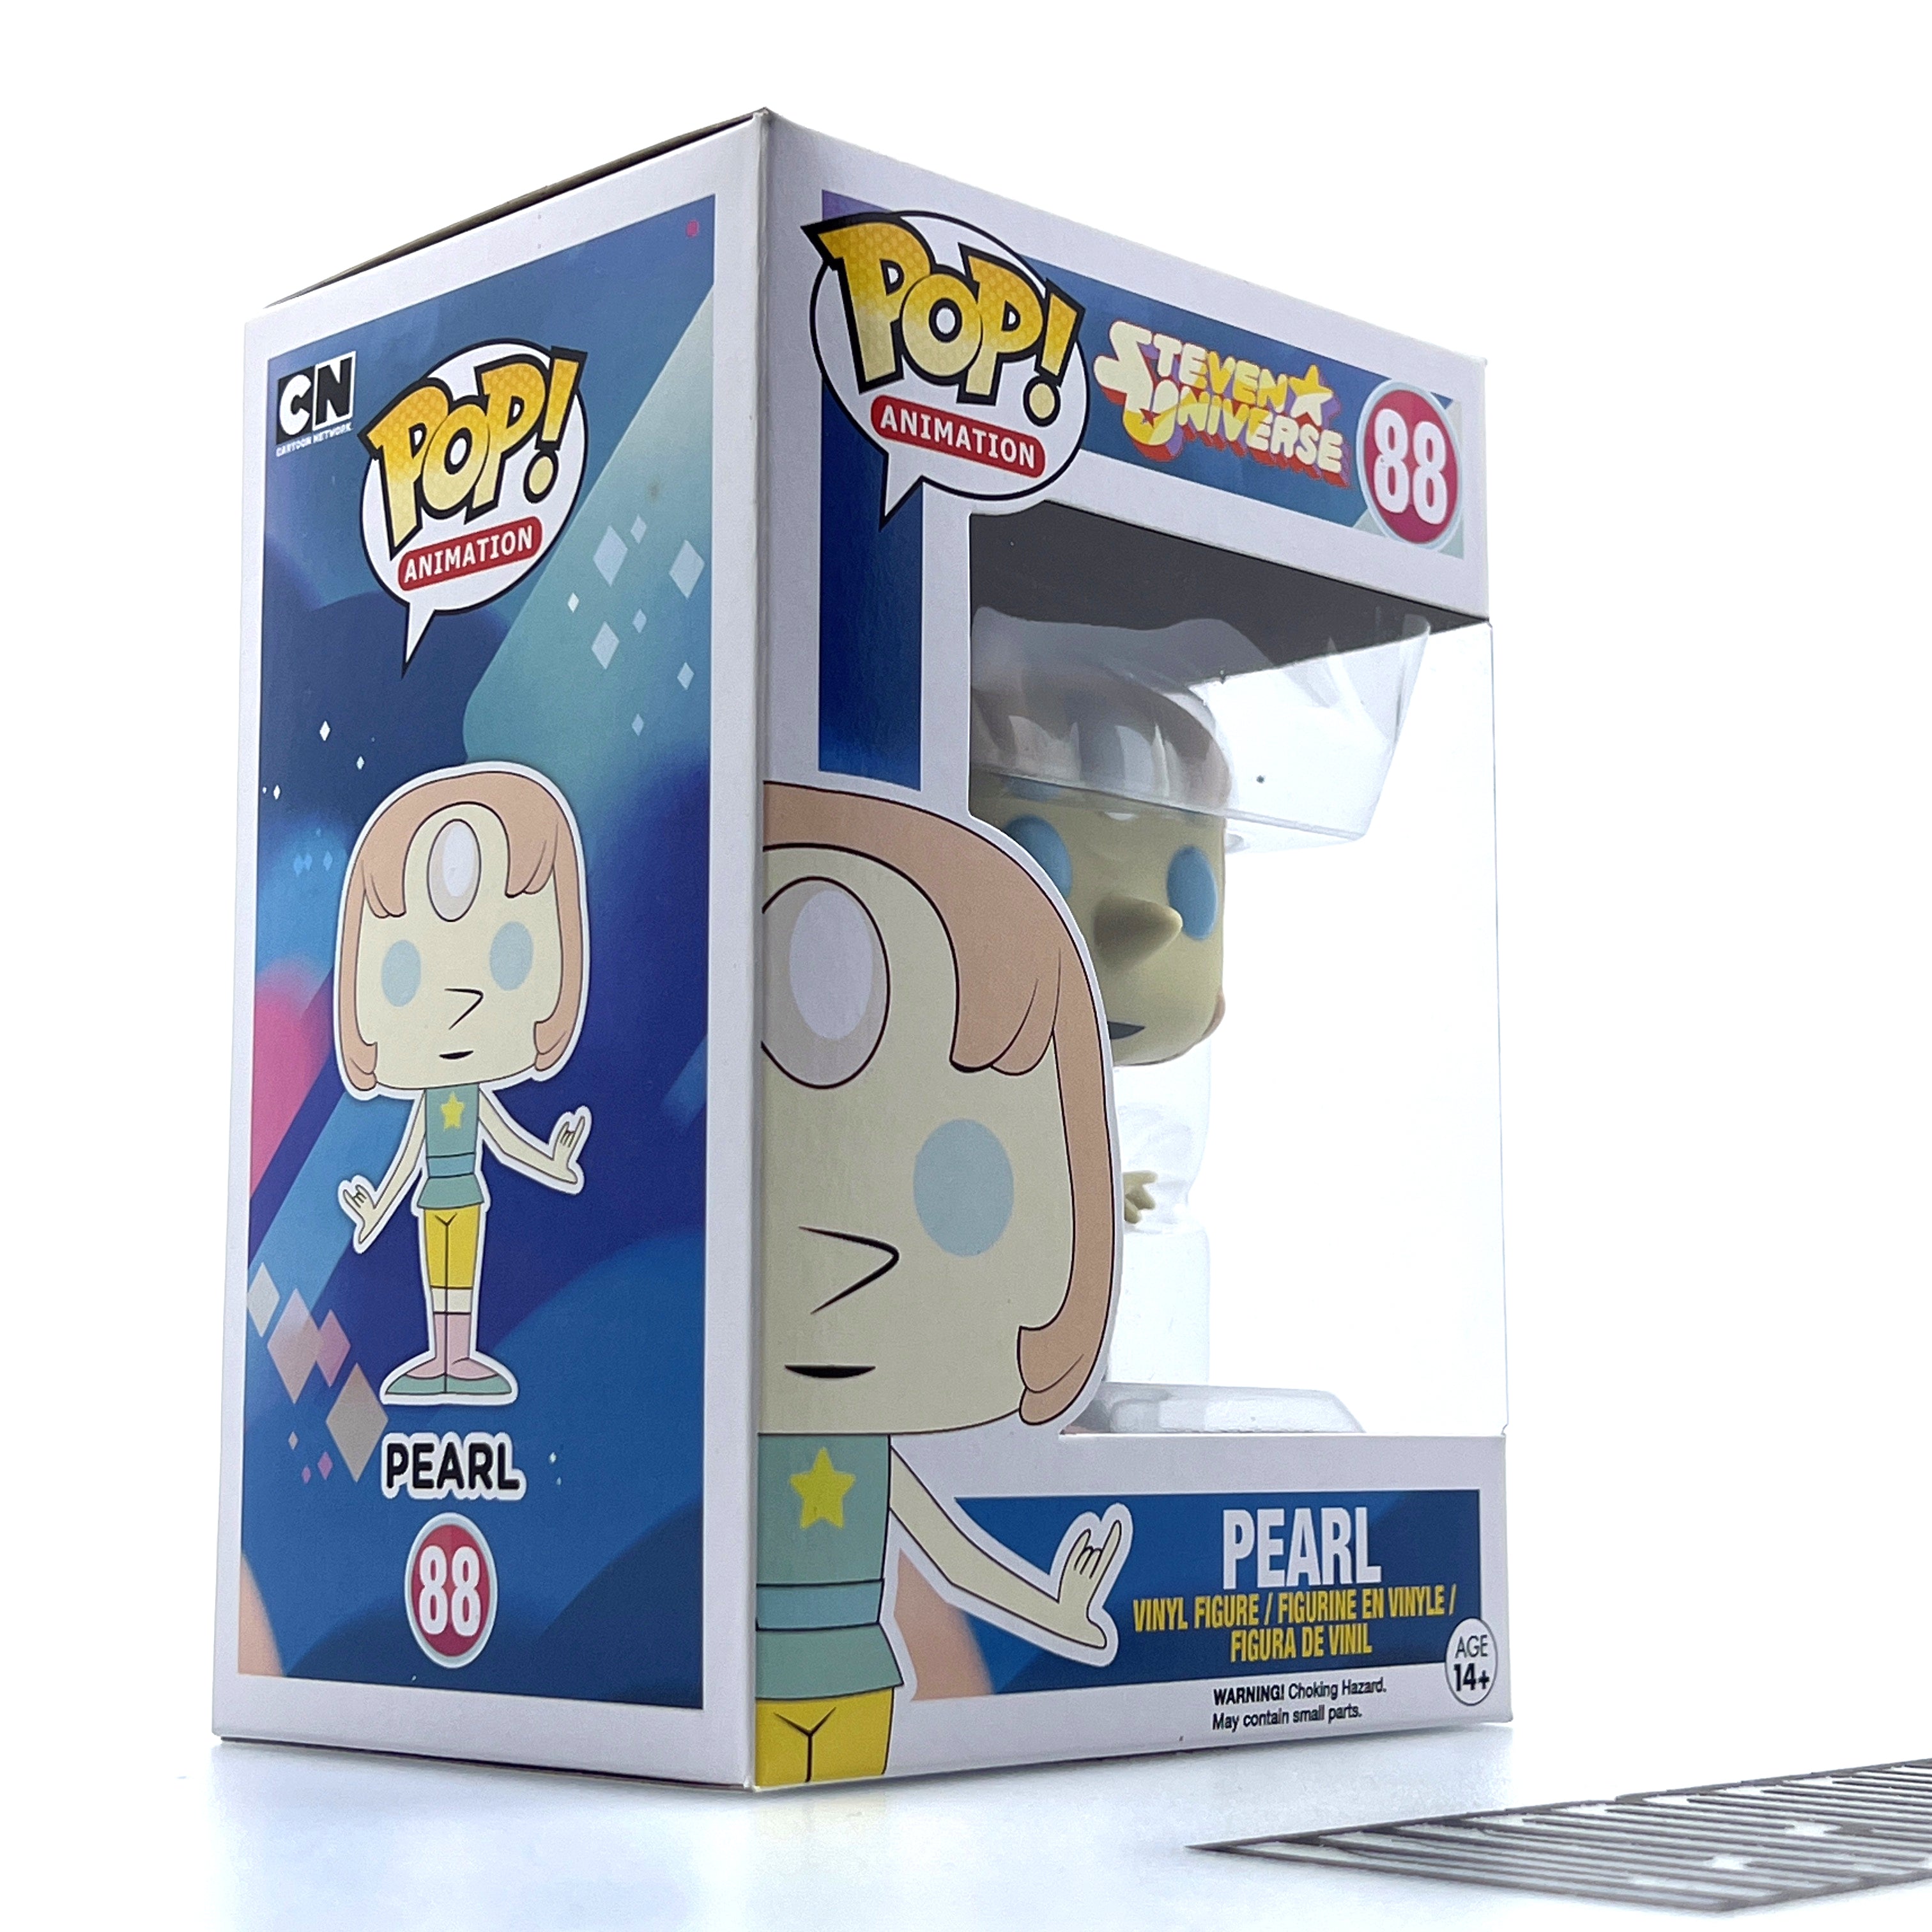 Funko Pop Animation Steven Universe Pearl Vaulted 88